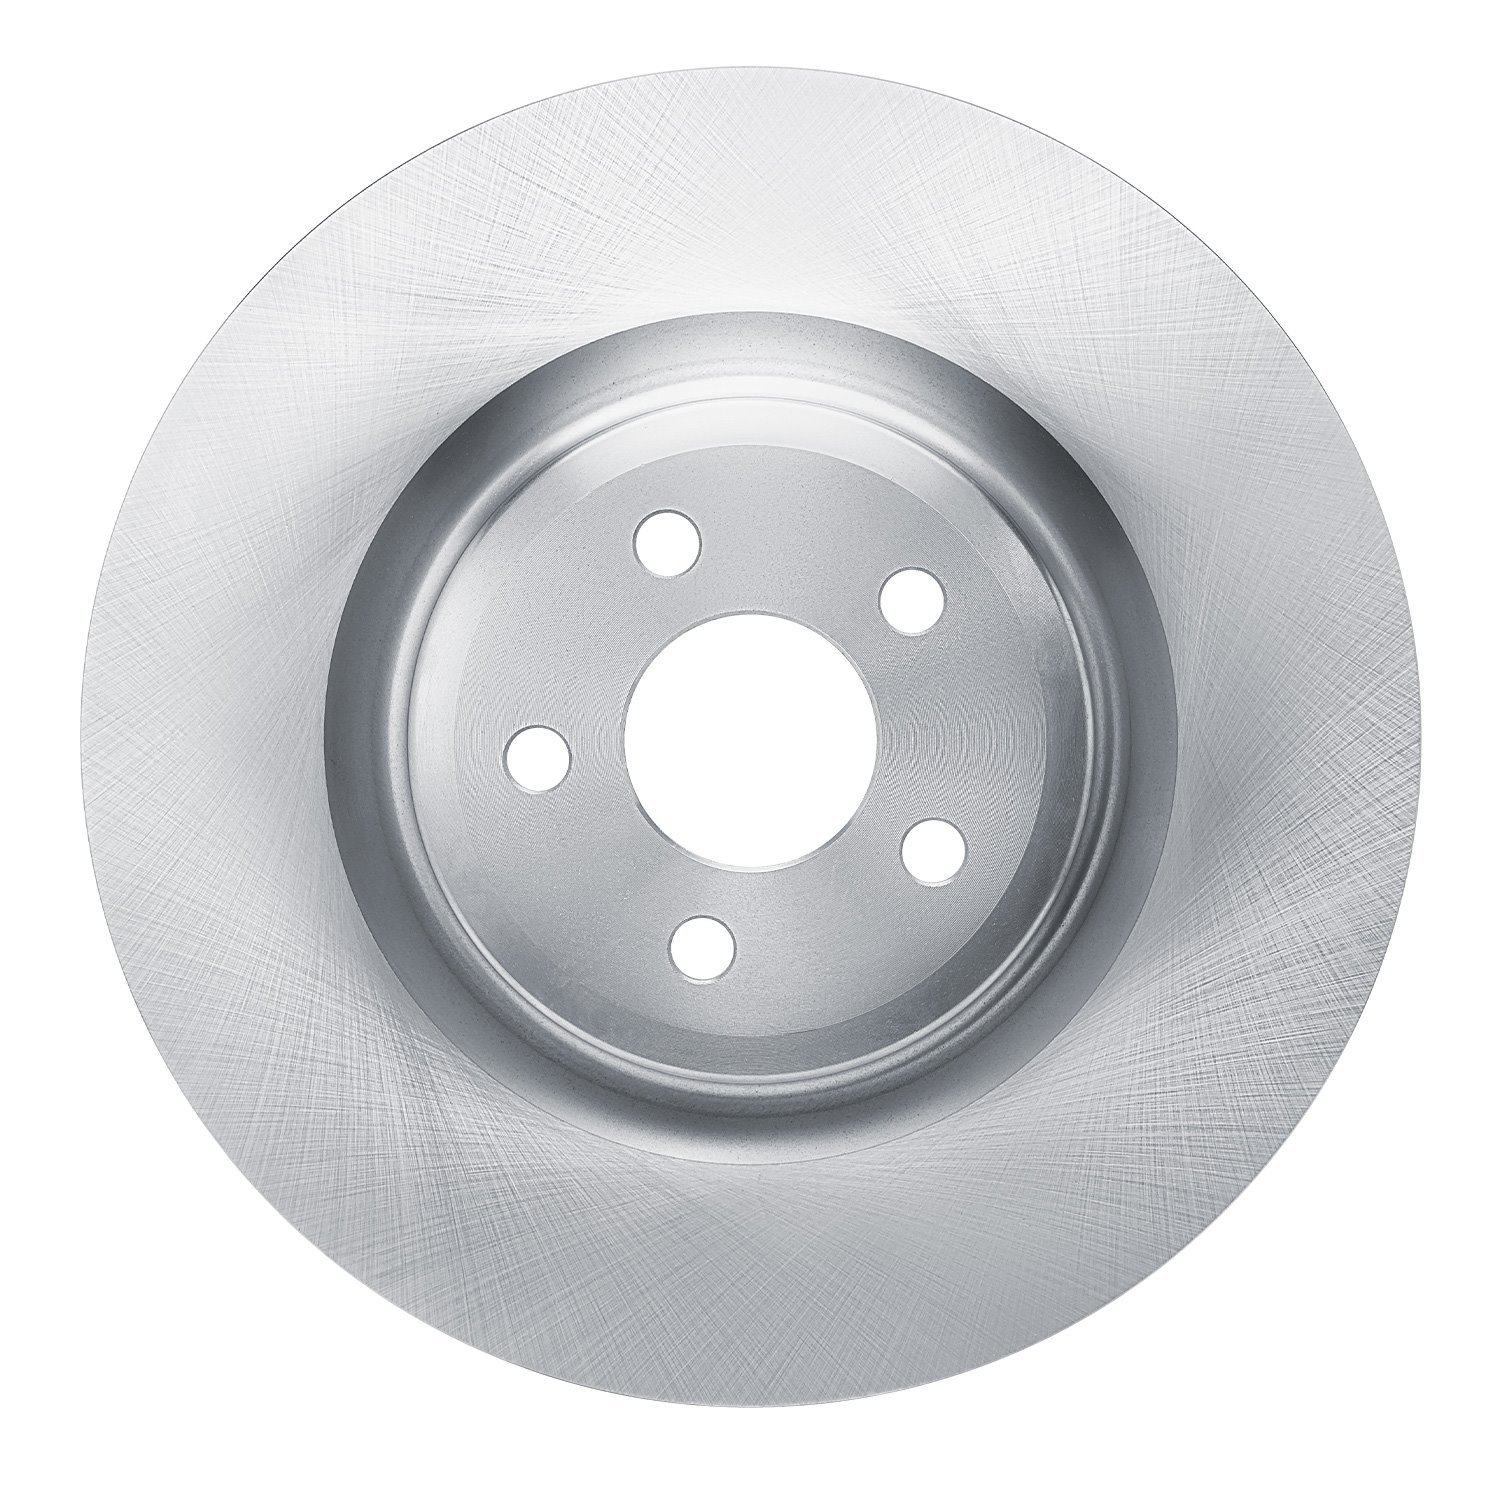 E-Line Blank Brake Rotor, Fits Select Ford/Lincoln/Mercury/Mazda, Position: Front